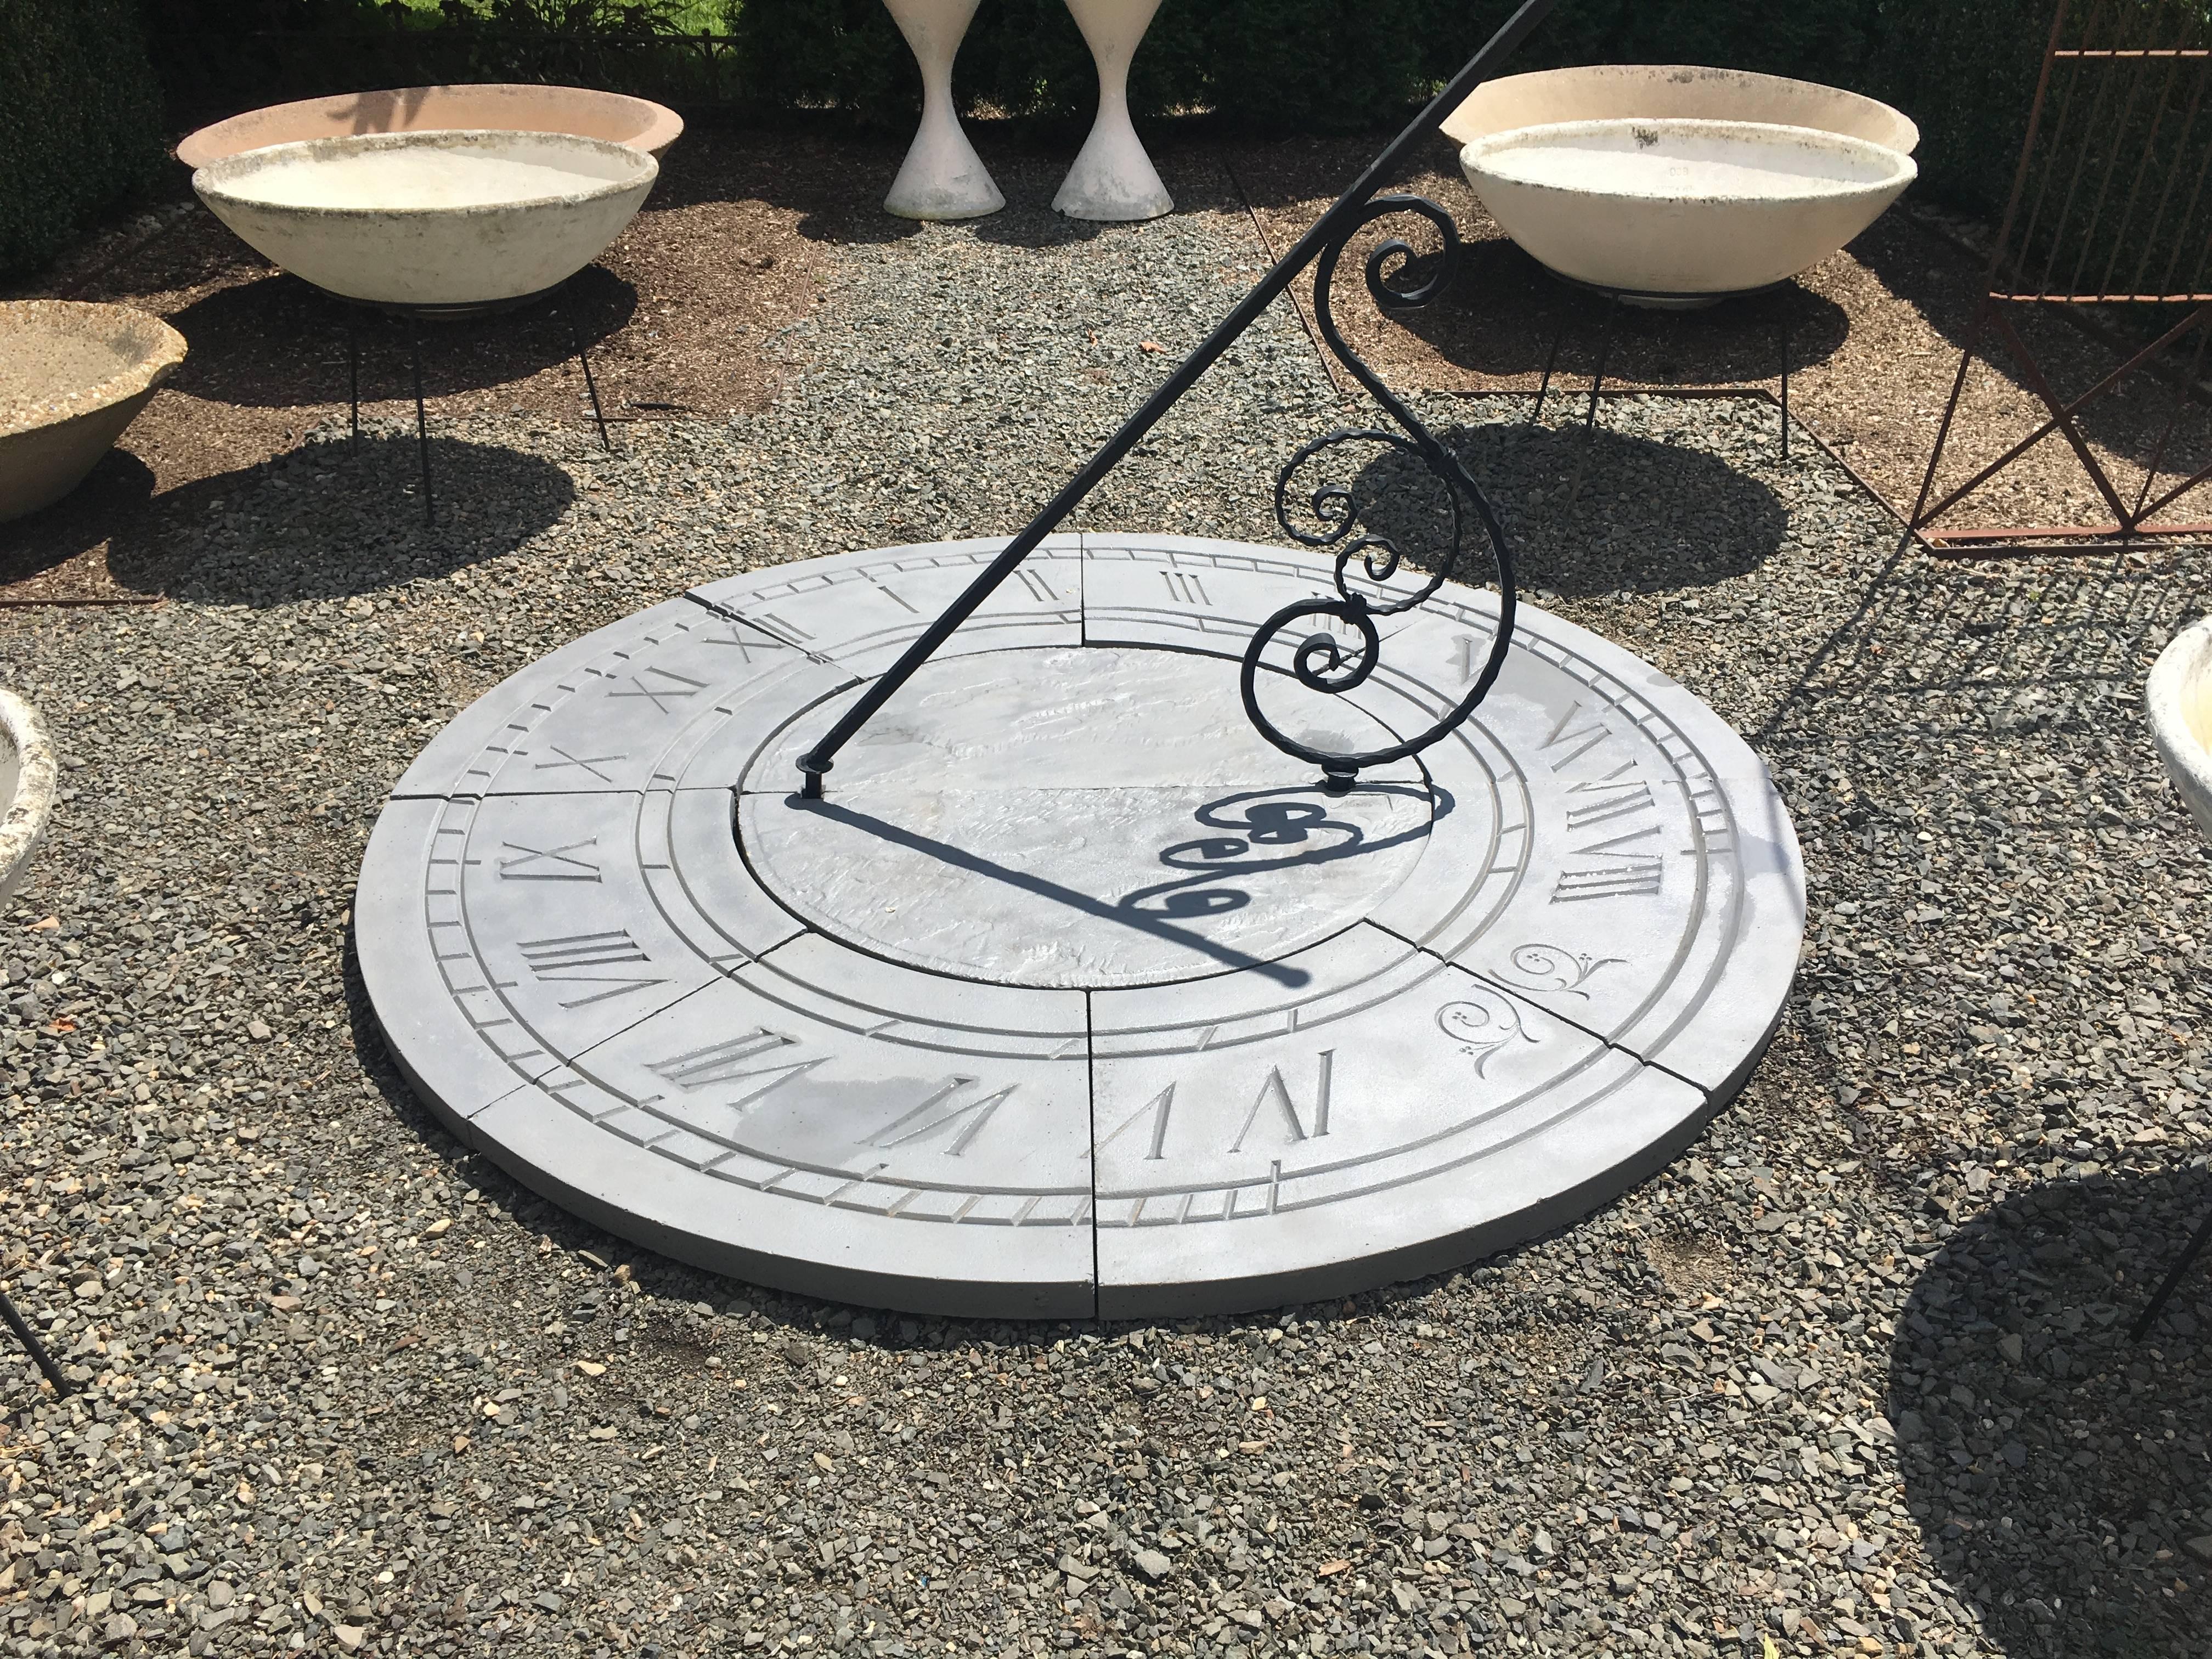 meaning of sundial